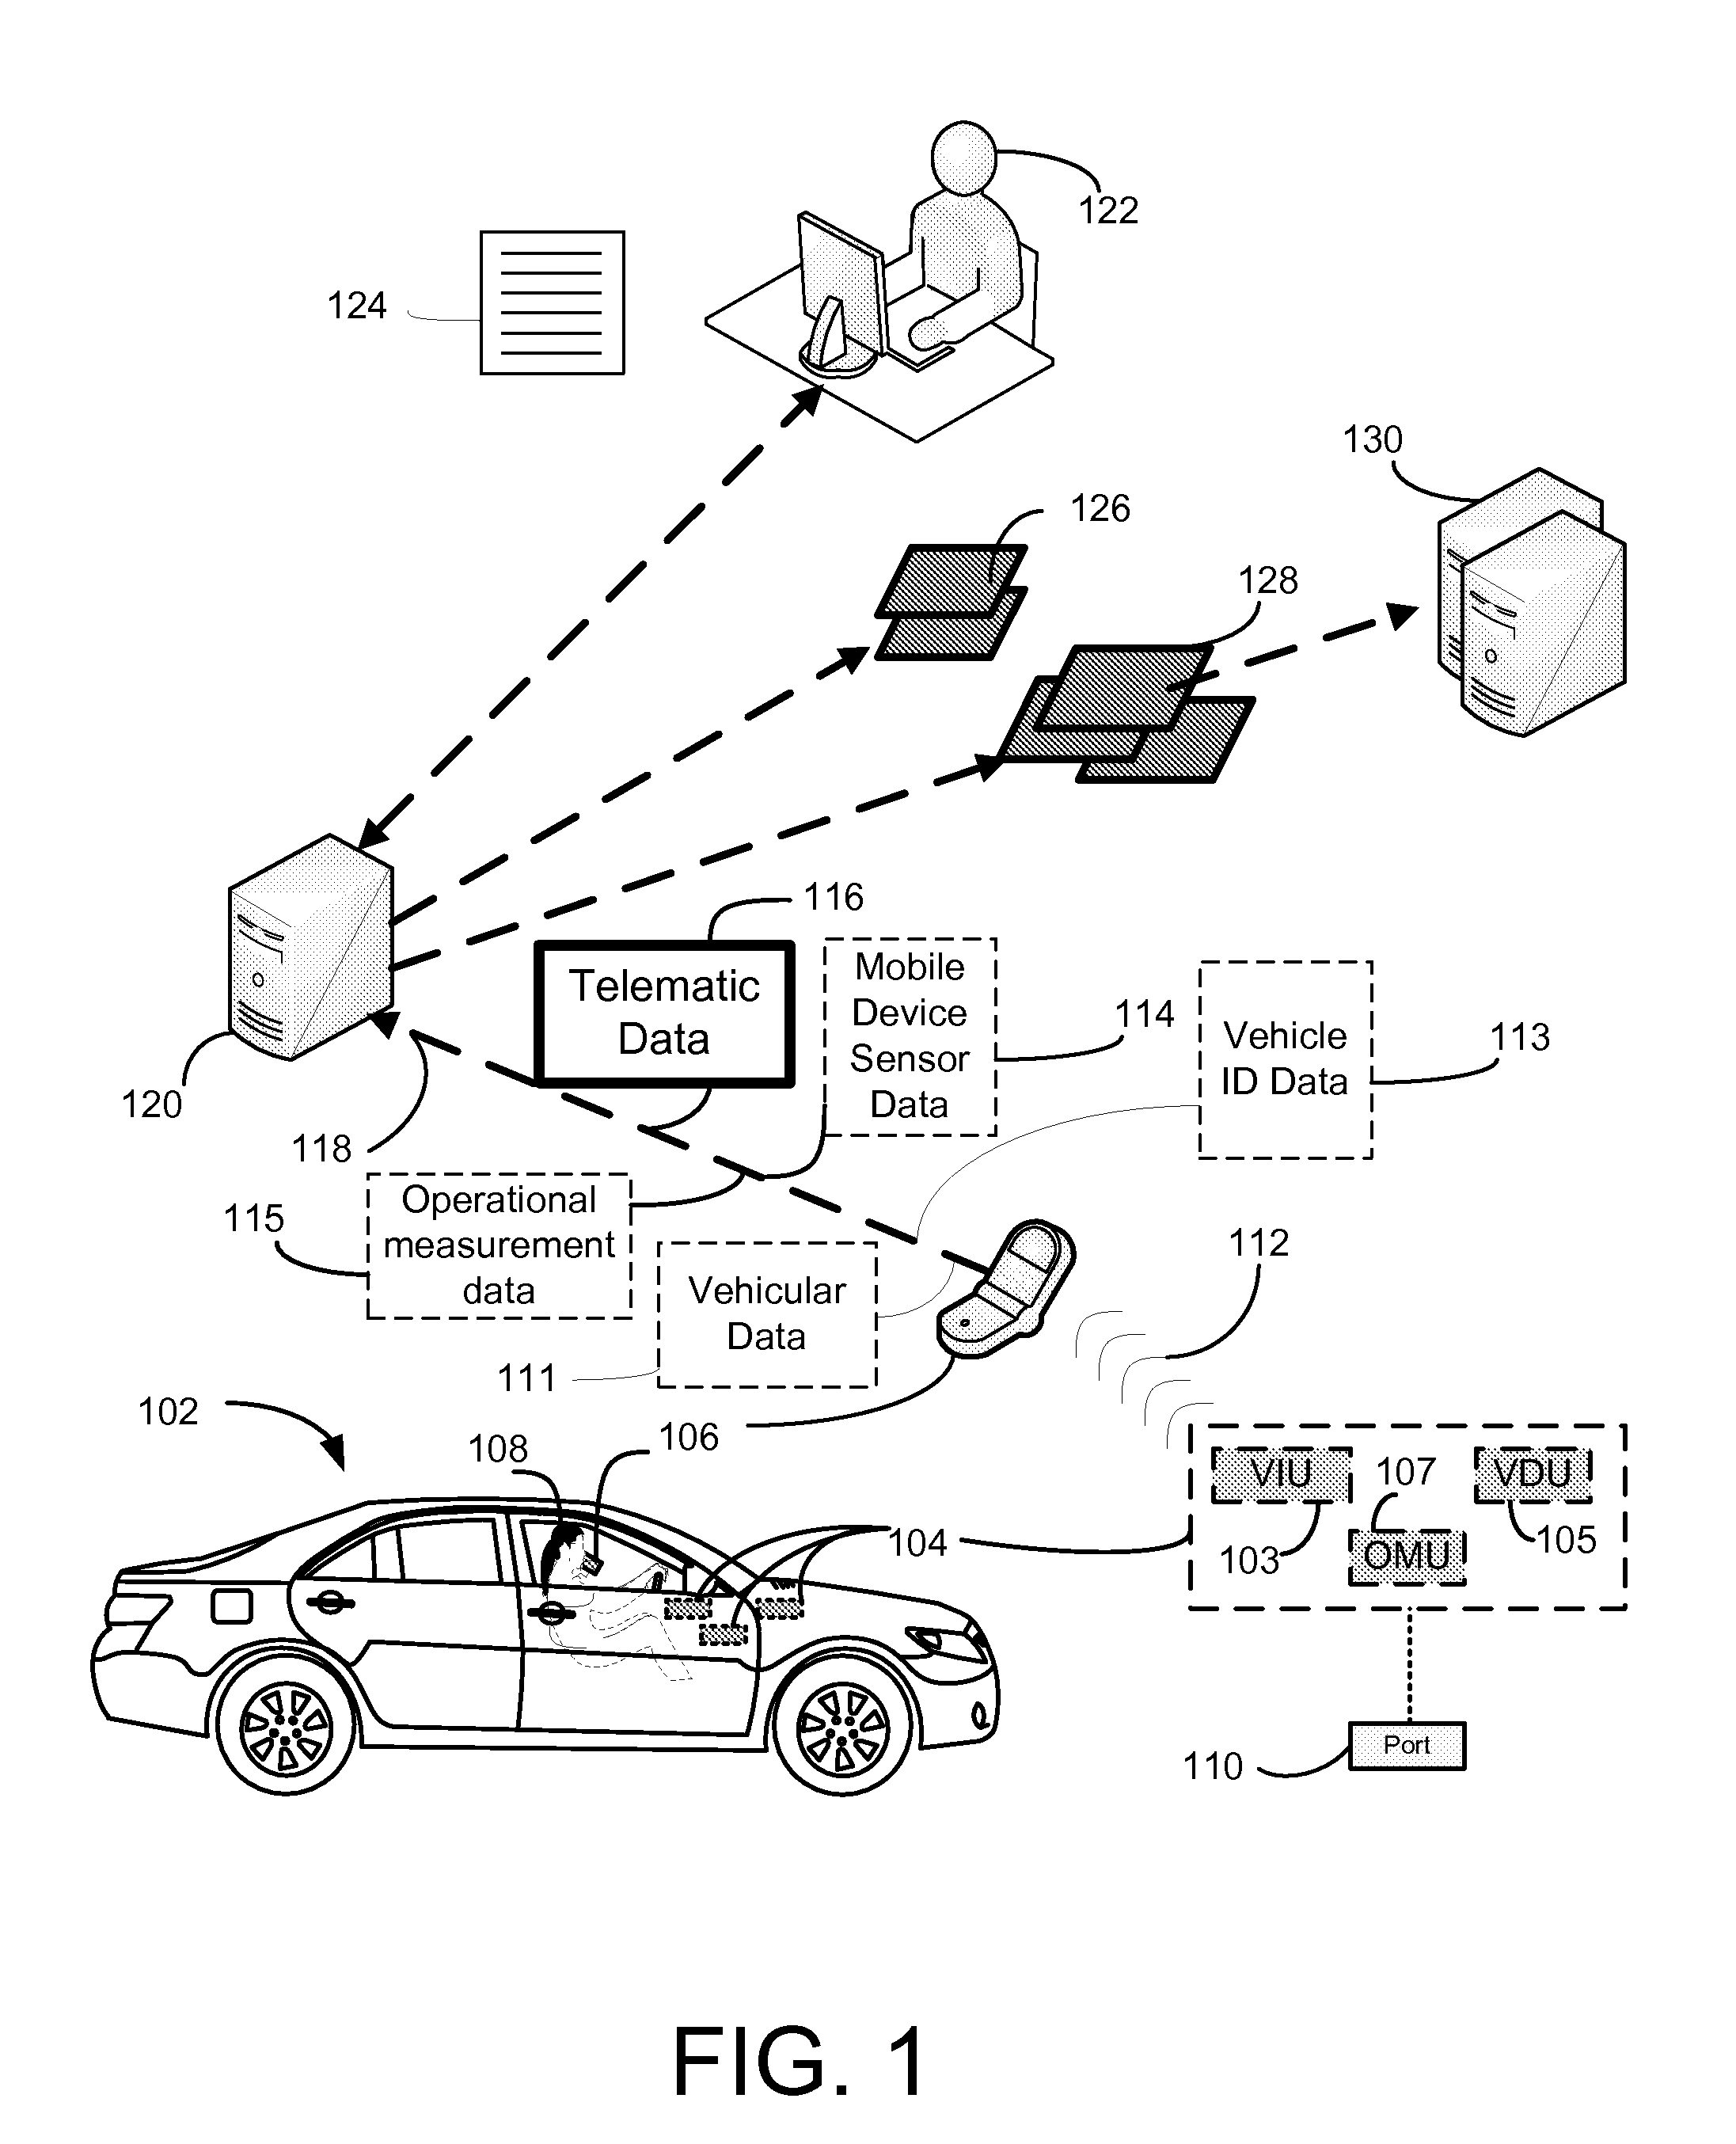 Systems and methods for telematics montoring and communications